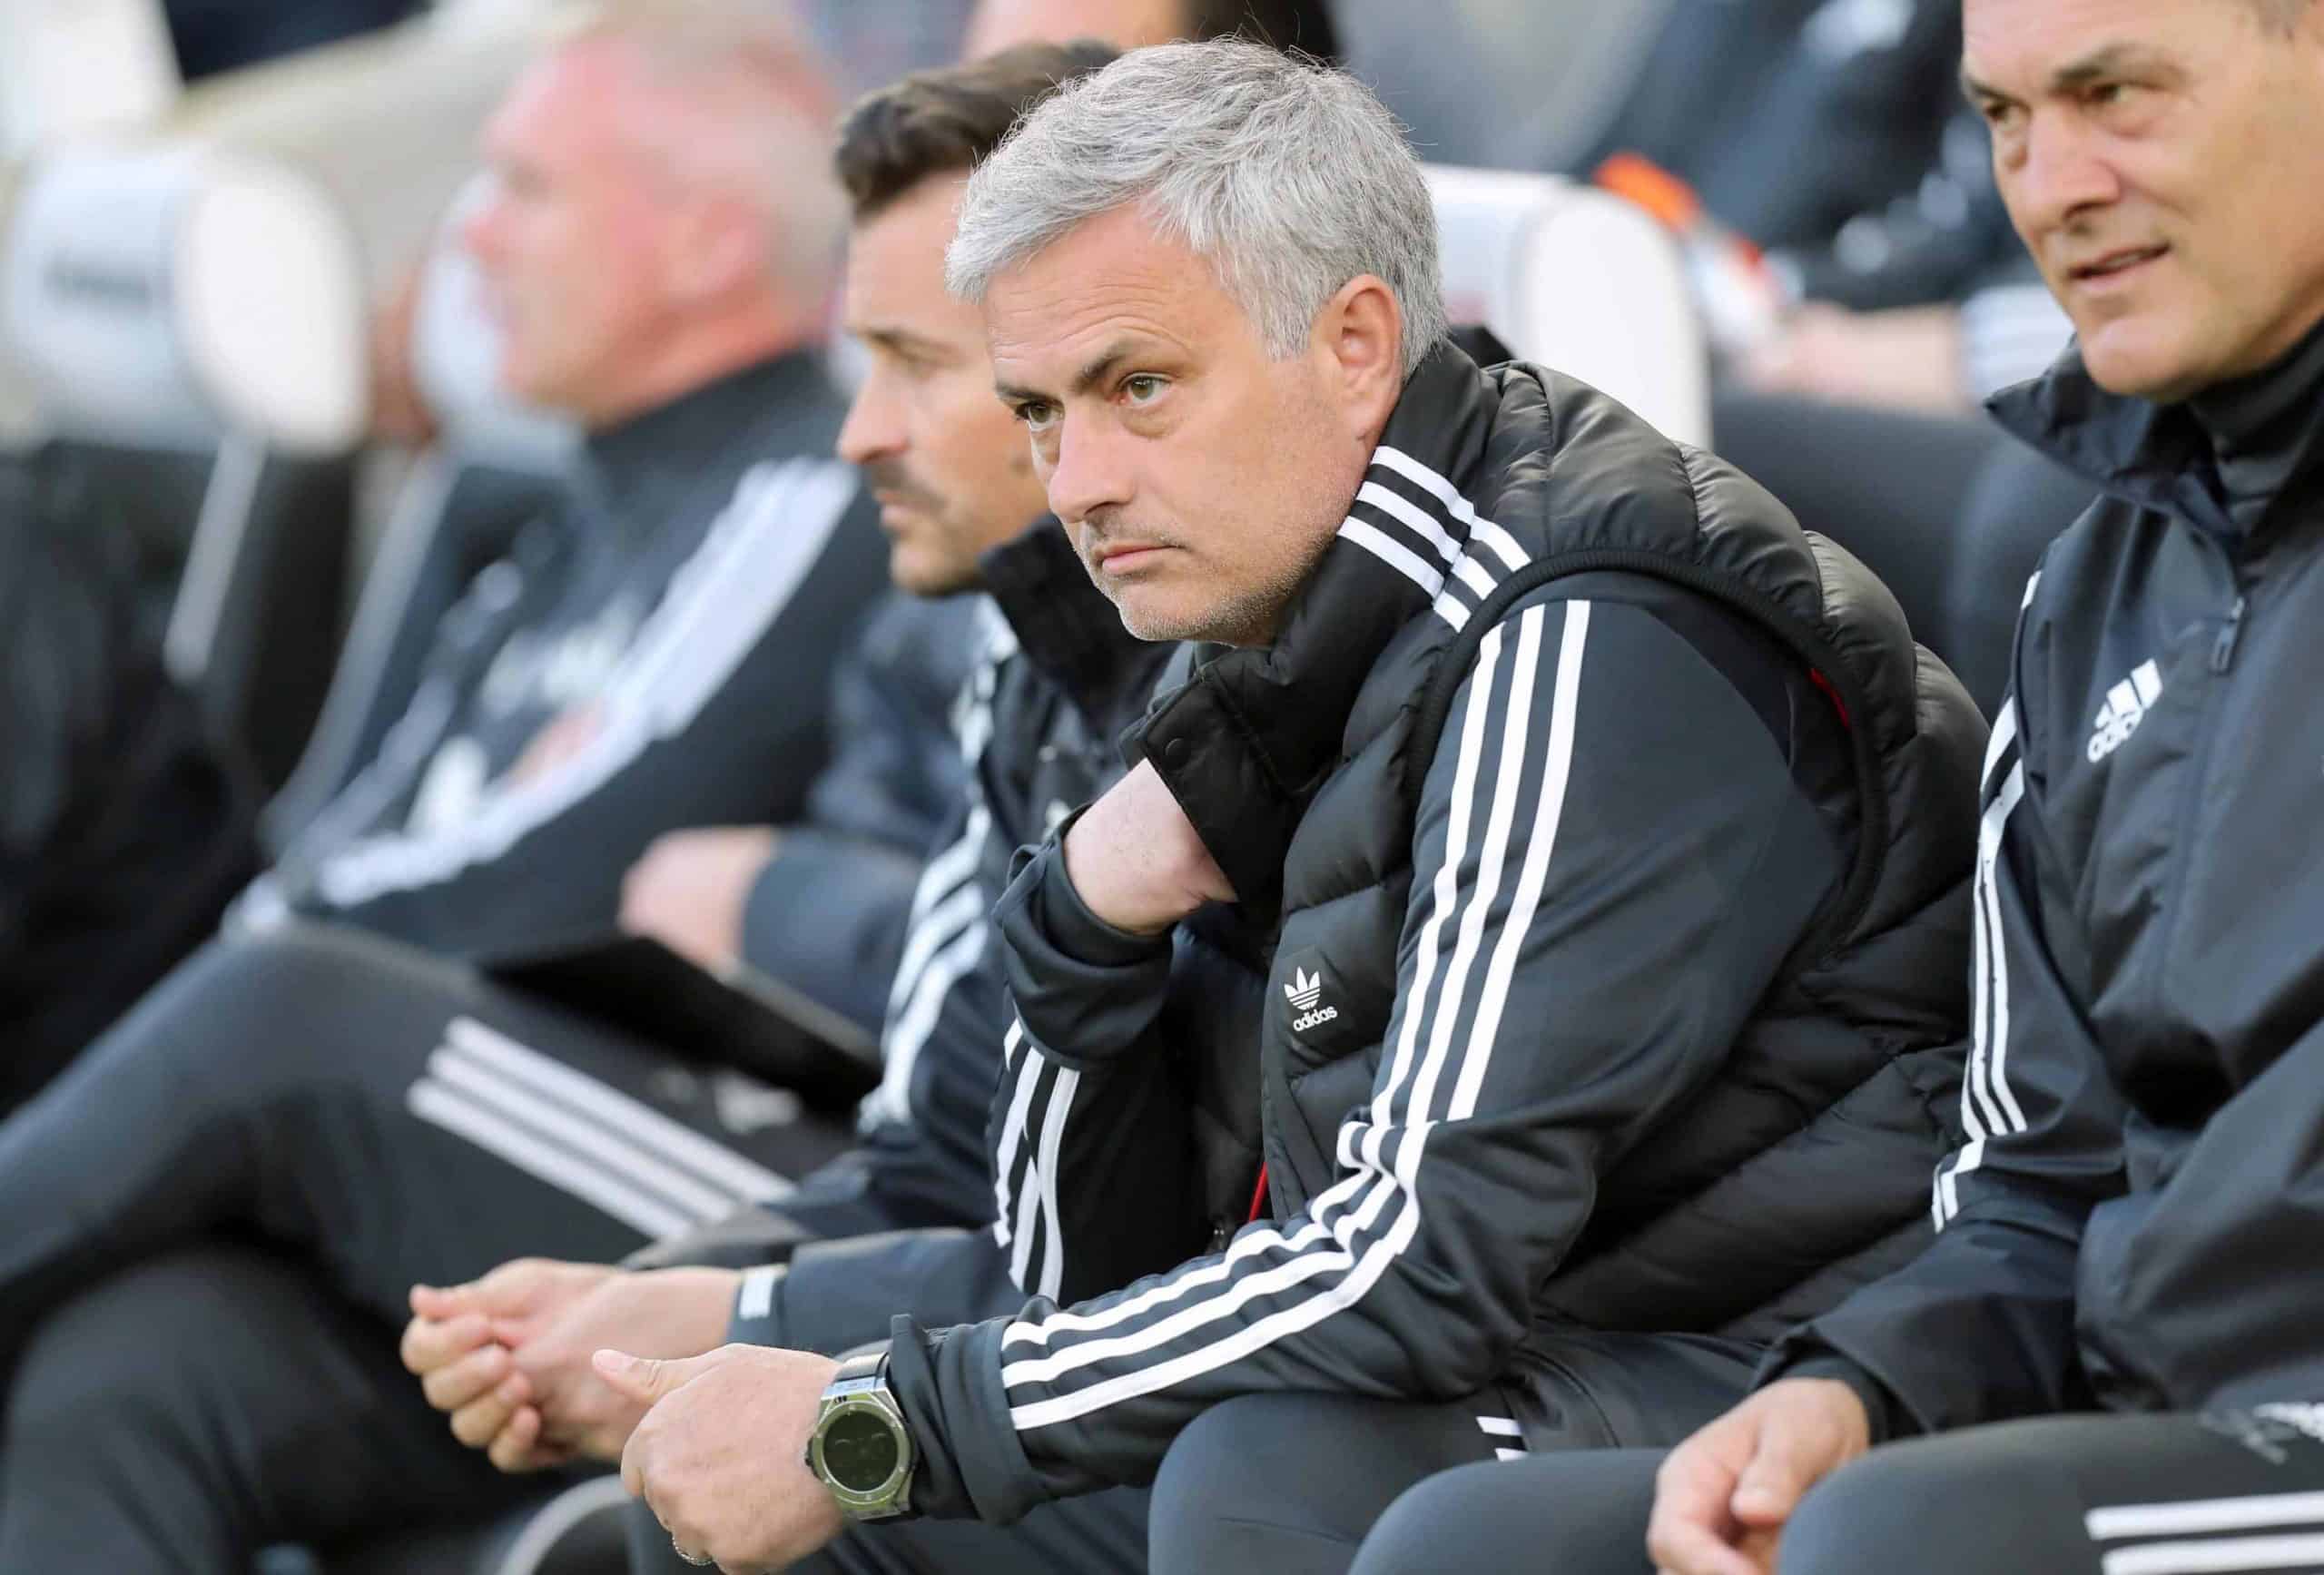 ‘He is an angry man’ – Ex Liverpool manager on Spurs new coach Mourinho